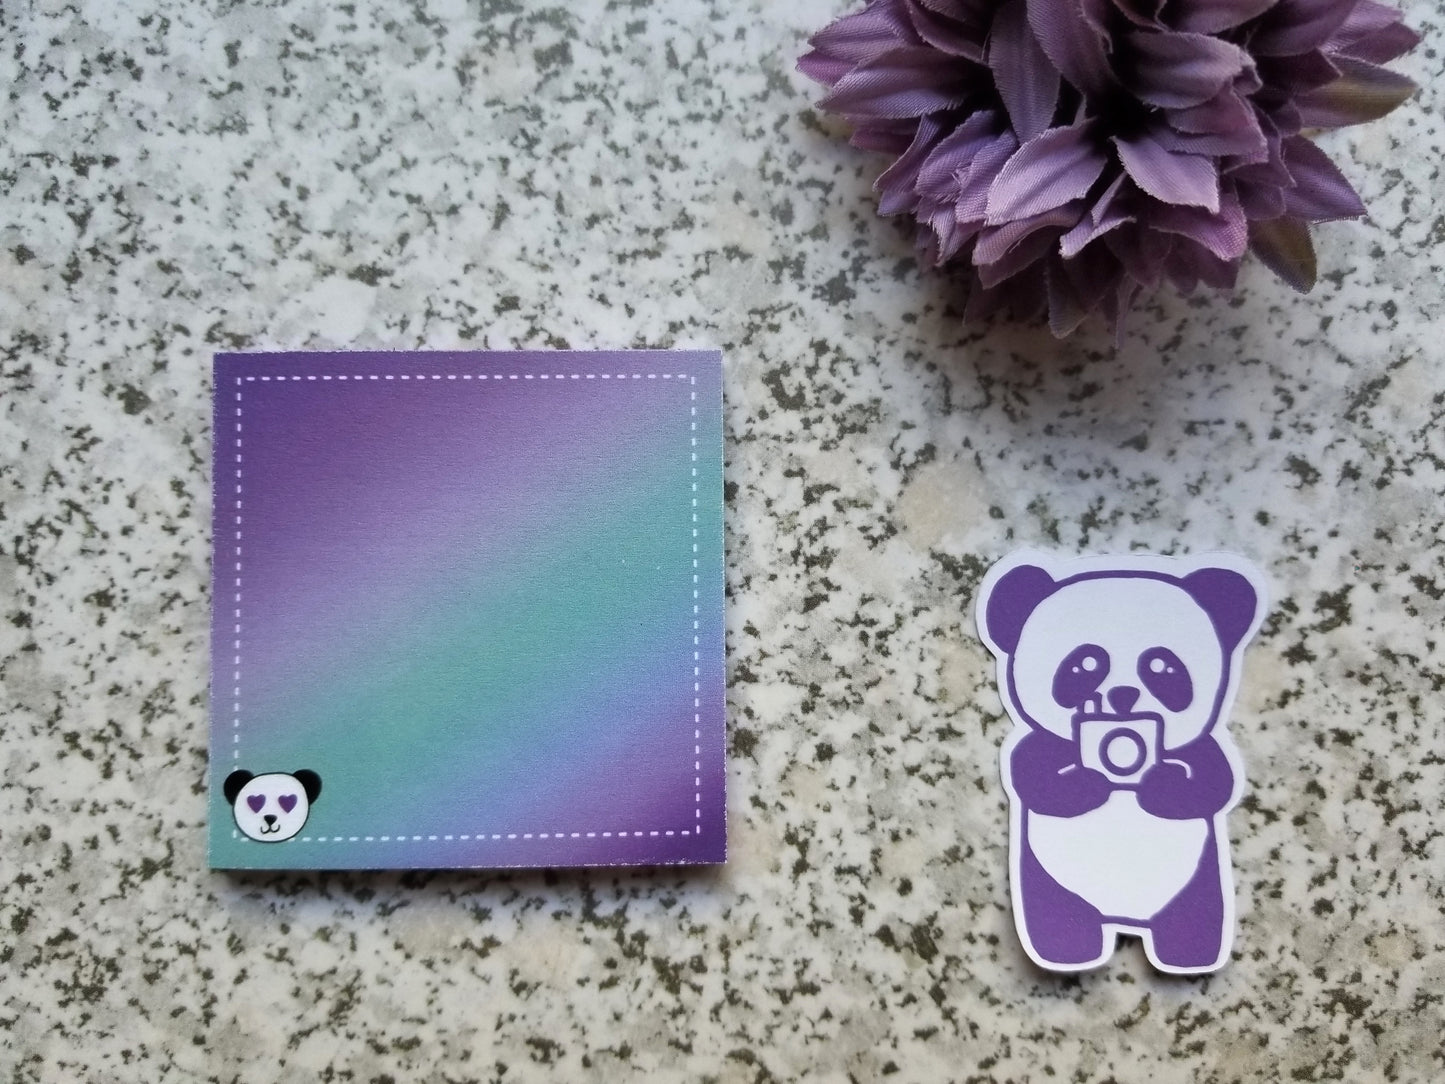 Sticky Notes - Purple Teal Ombre Gradient with Panda Heart Eyes